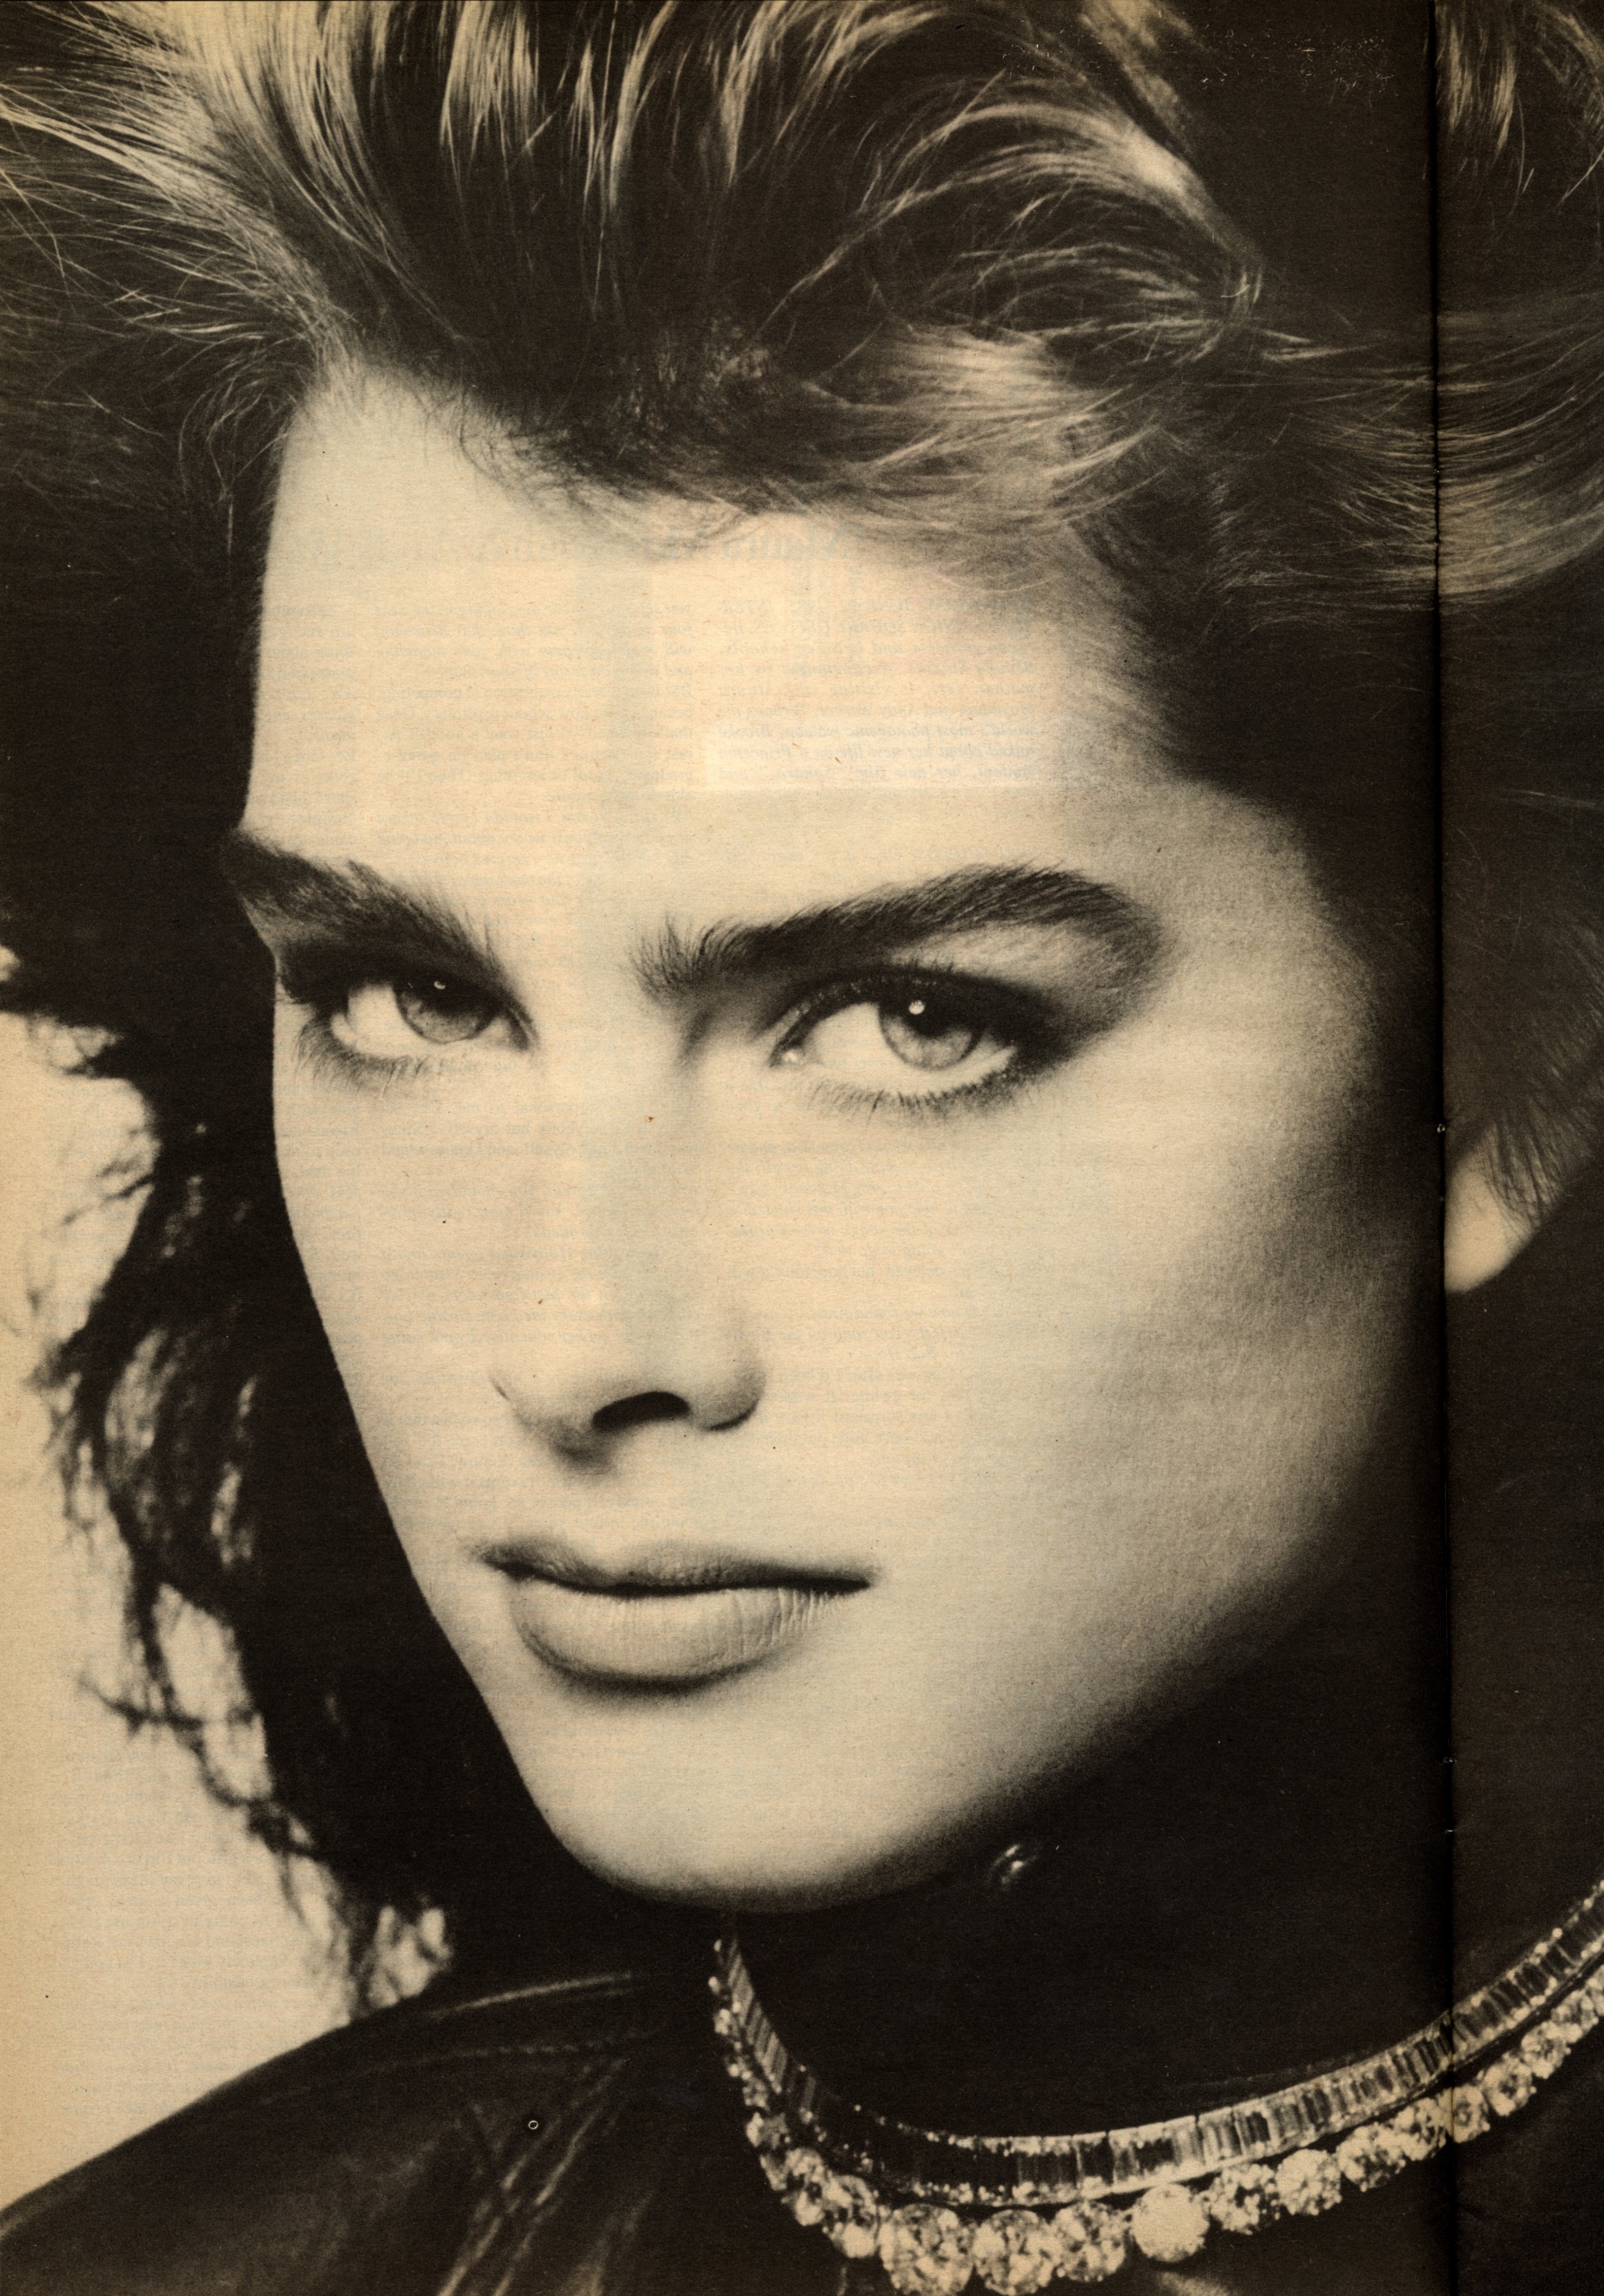 Brooke Shields Broke the Internet Before It Existed